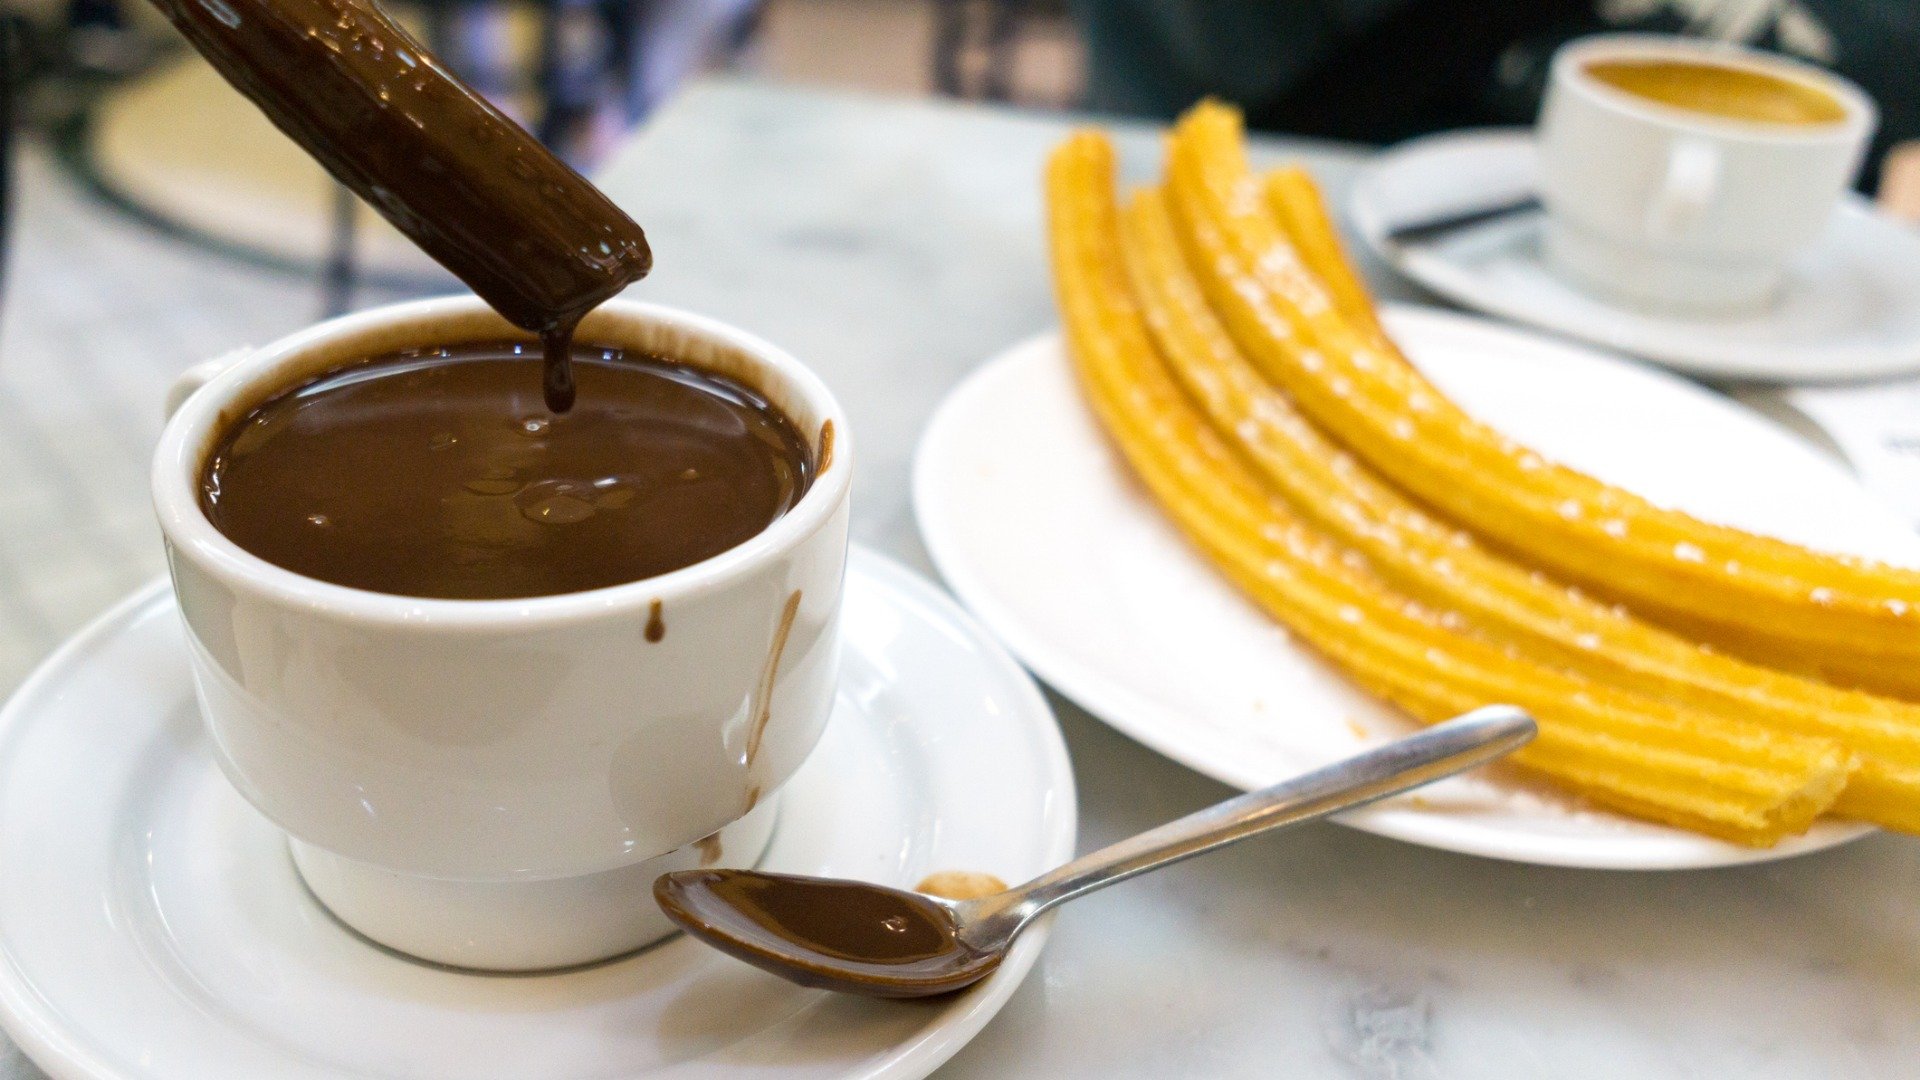 This image shows a cup of thich hot chocolate and churros. 